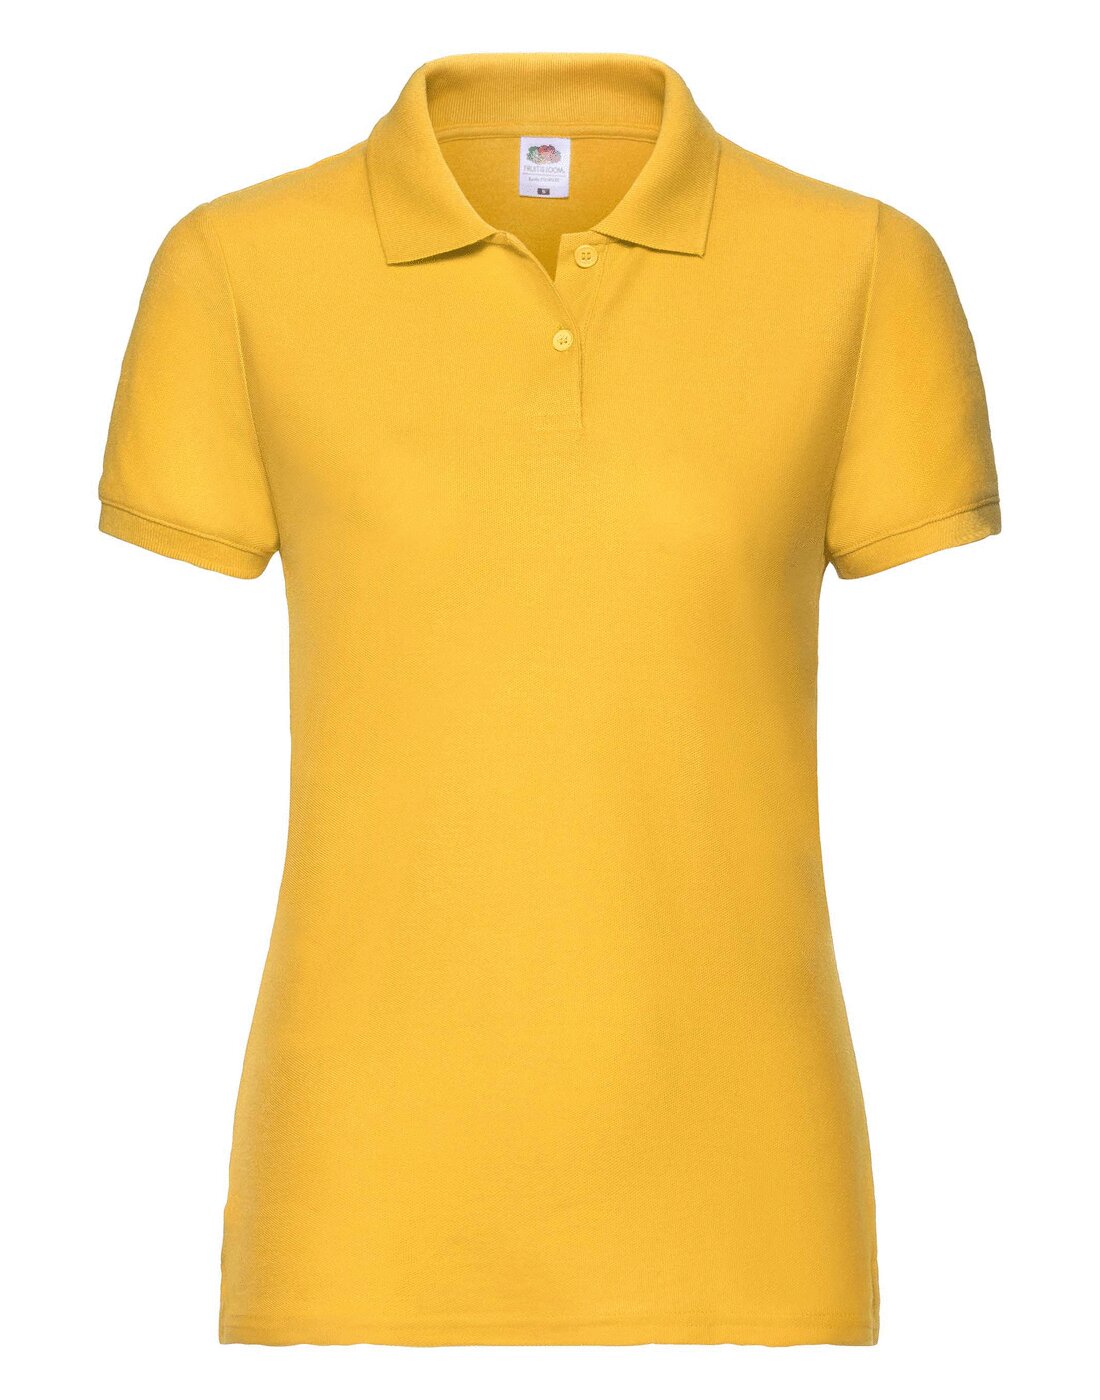 Fruit of the Loom Ladies 65/35 Polo - Sunflower